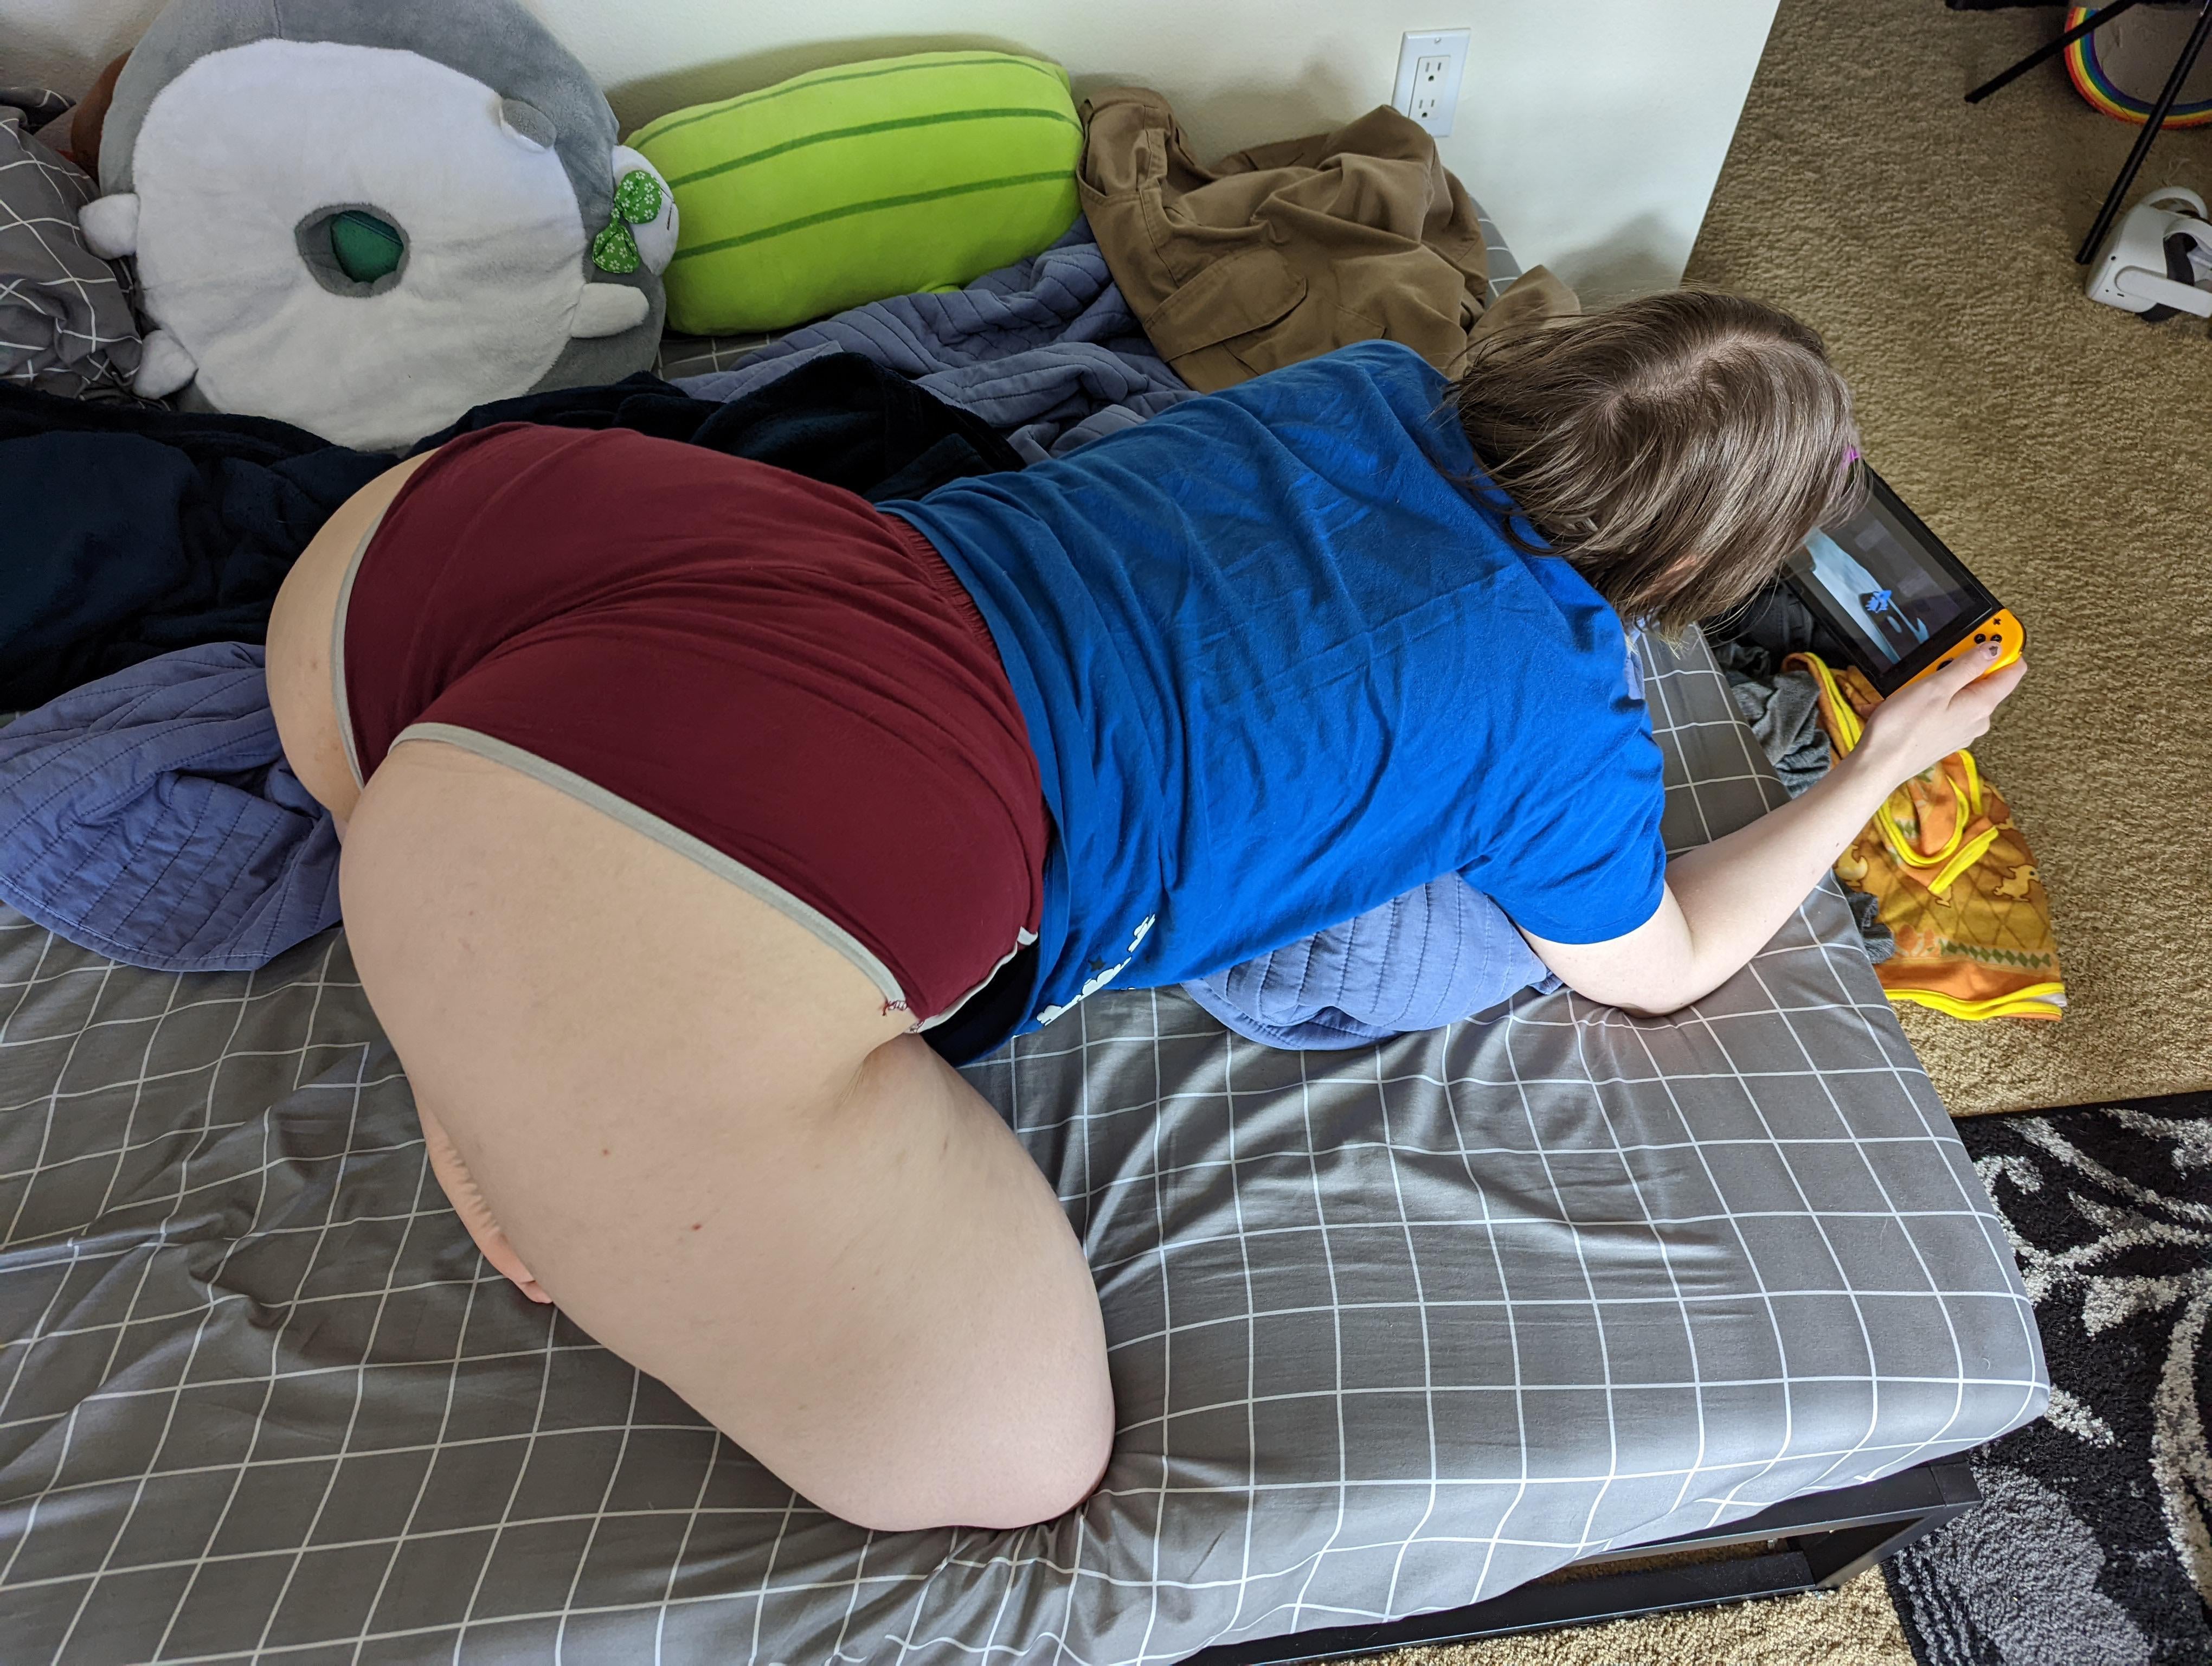 PAWG Proper gaming position